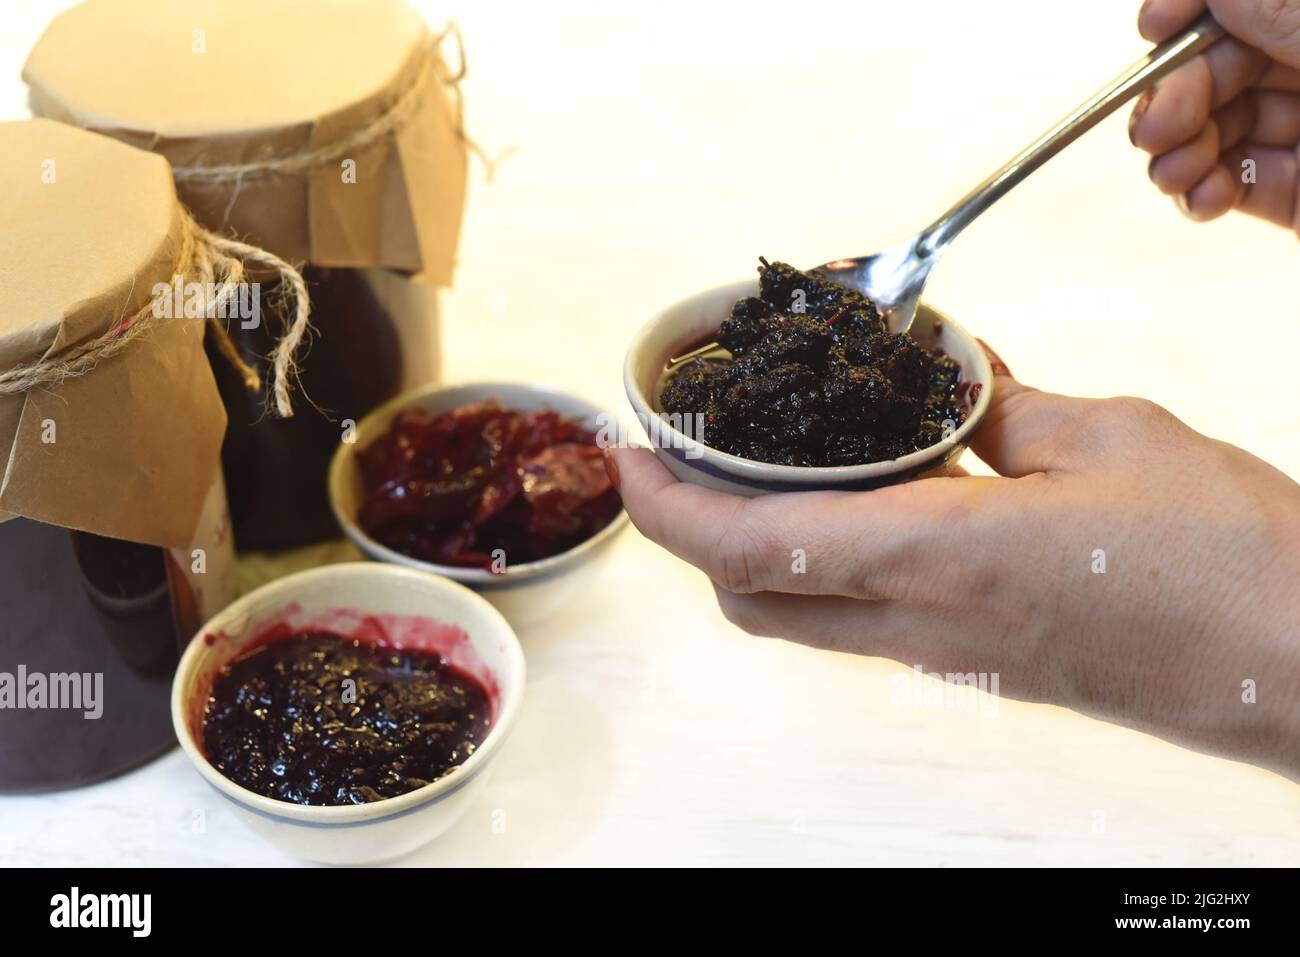 A hand serving homemade mulberry jam in small bowls from jars Stock Photo